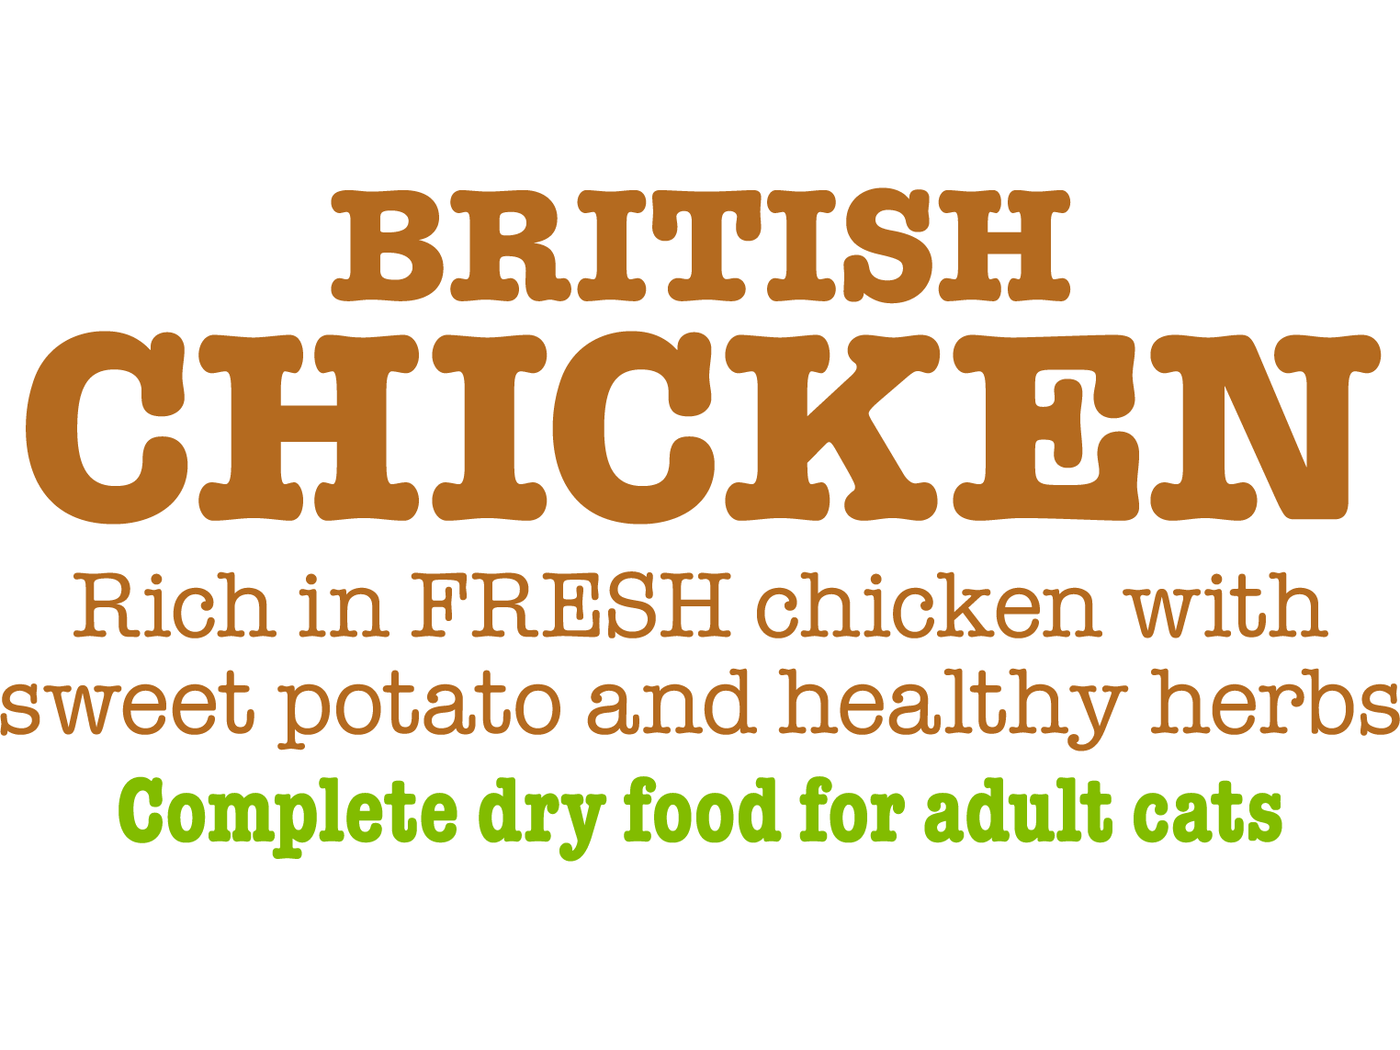 British Chicken Complete dry food for Adult Cats 375gm /Little BigPaw